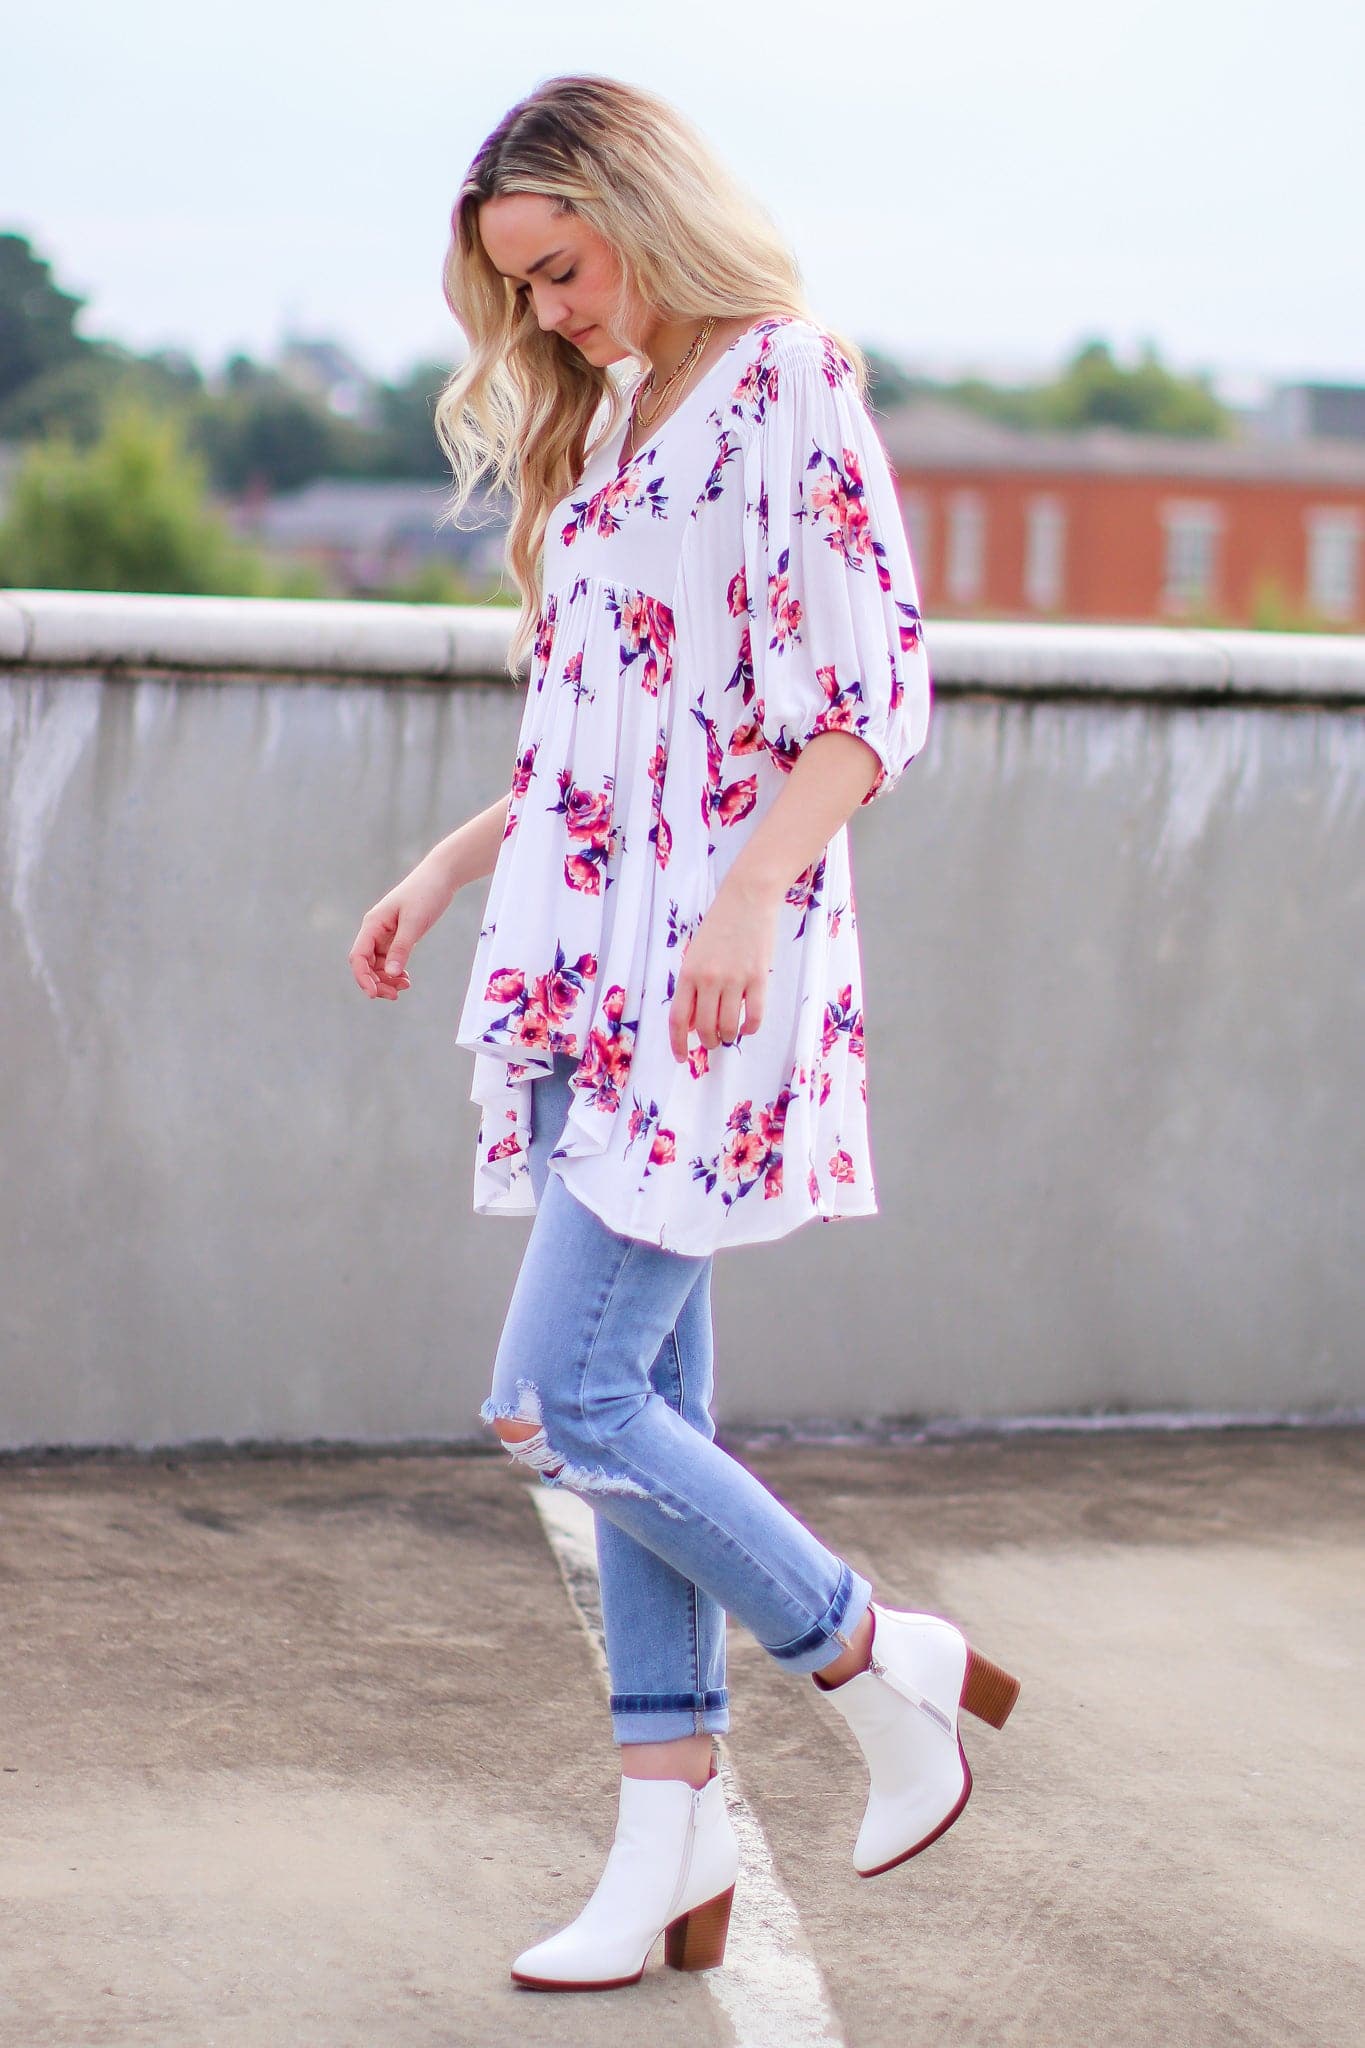  Totally Botanic Floral Tunic Top - CURVE - FINAL SALE - Madison and Mallory